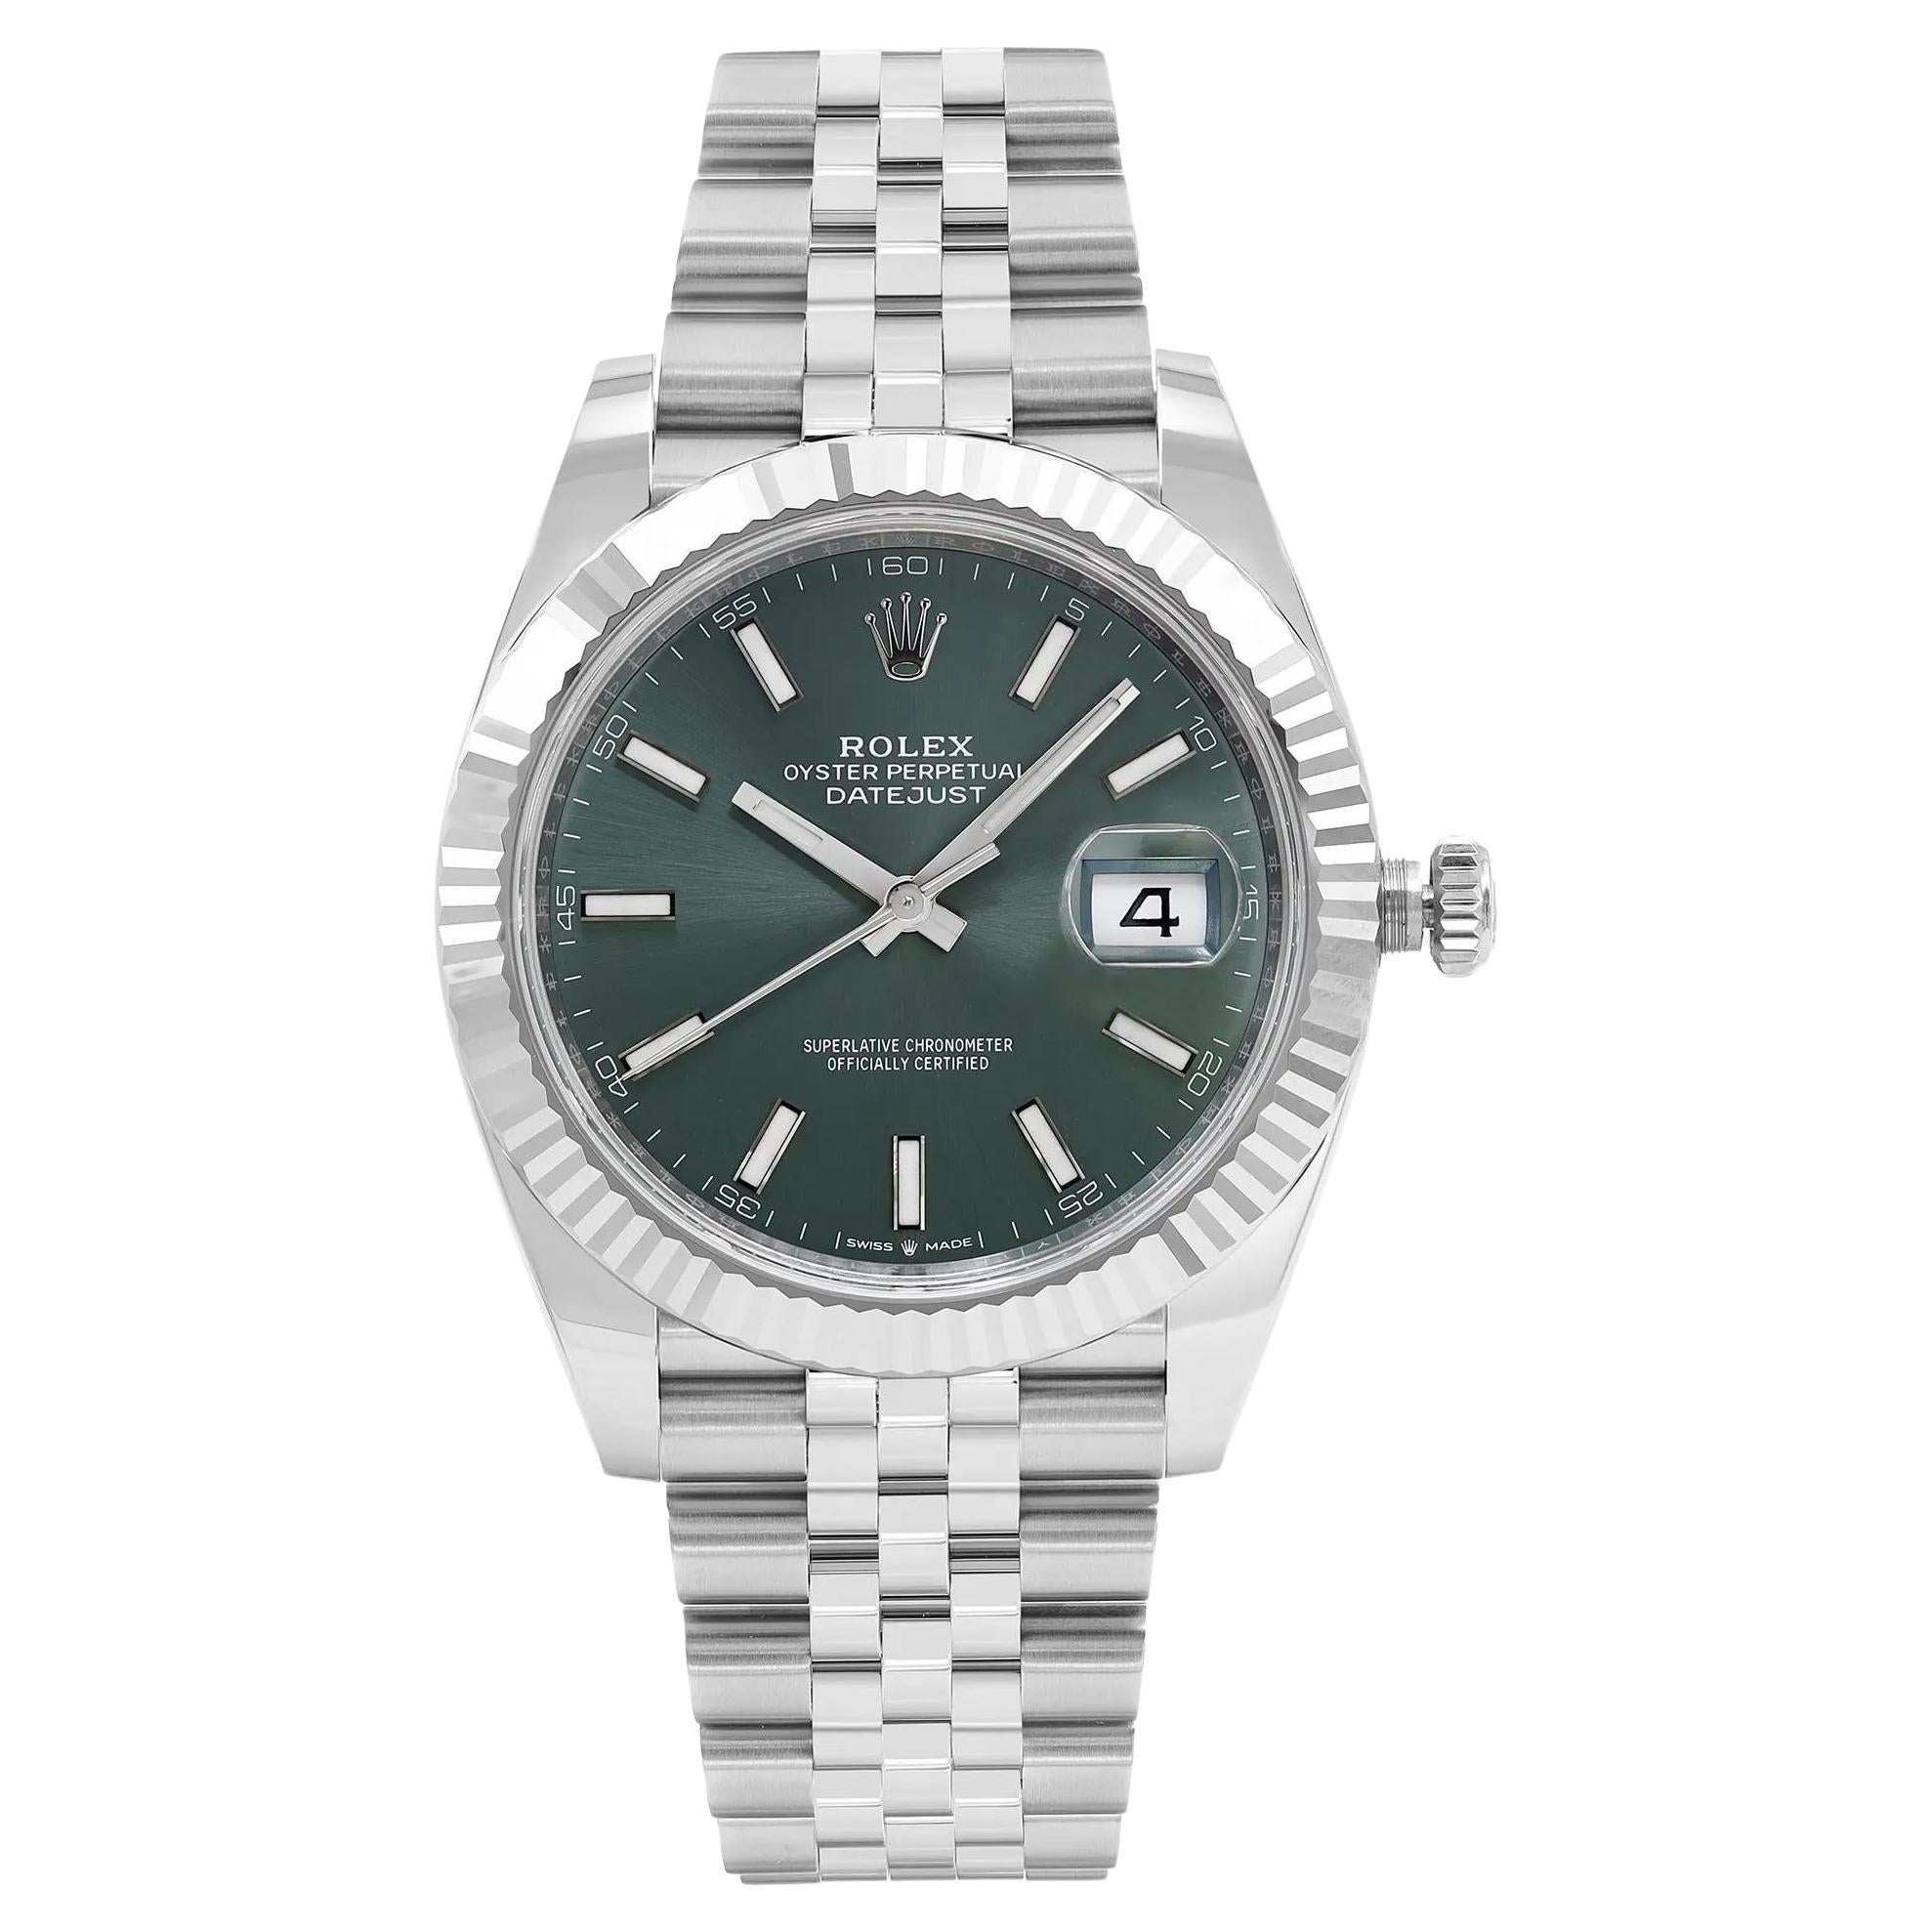 NEW Rolex Datejust 41 Steel White Gold Mint Green Dial Automatic Watch 126334